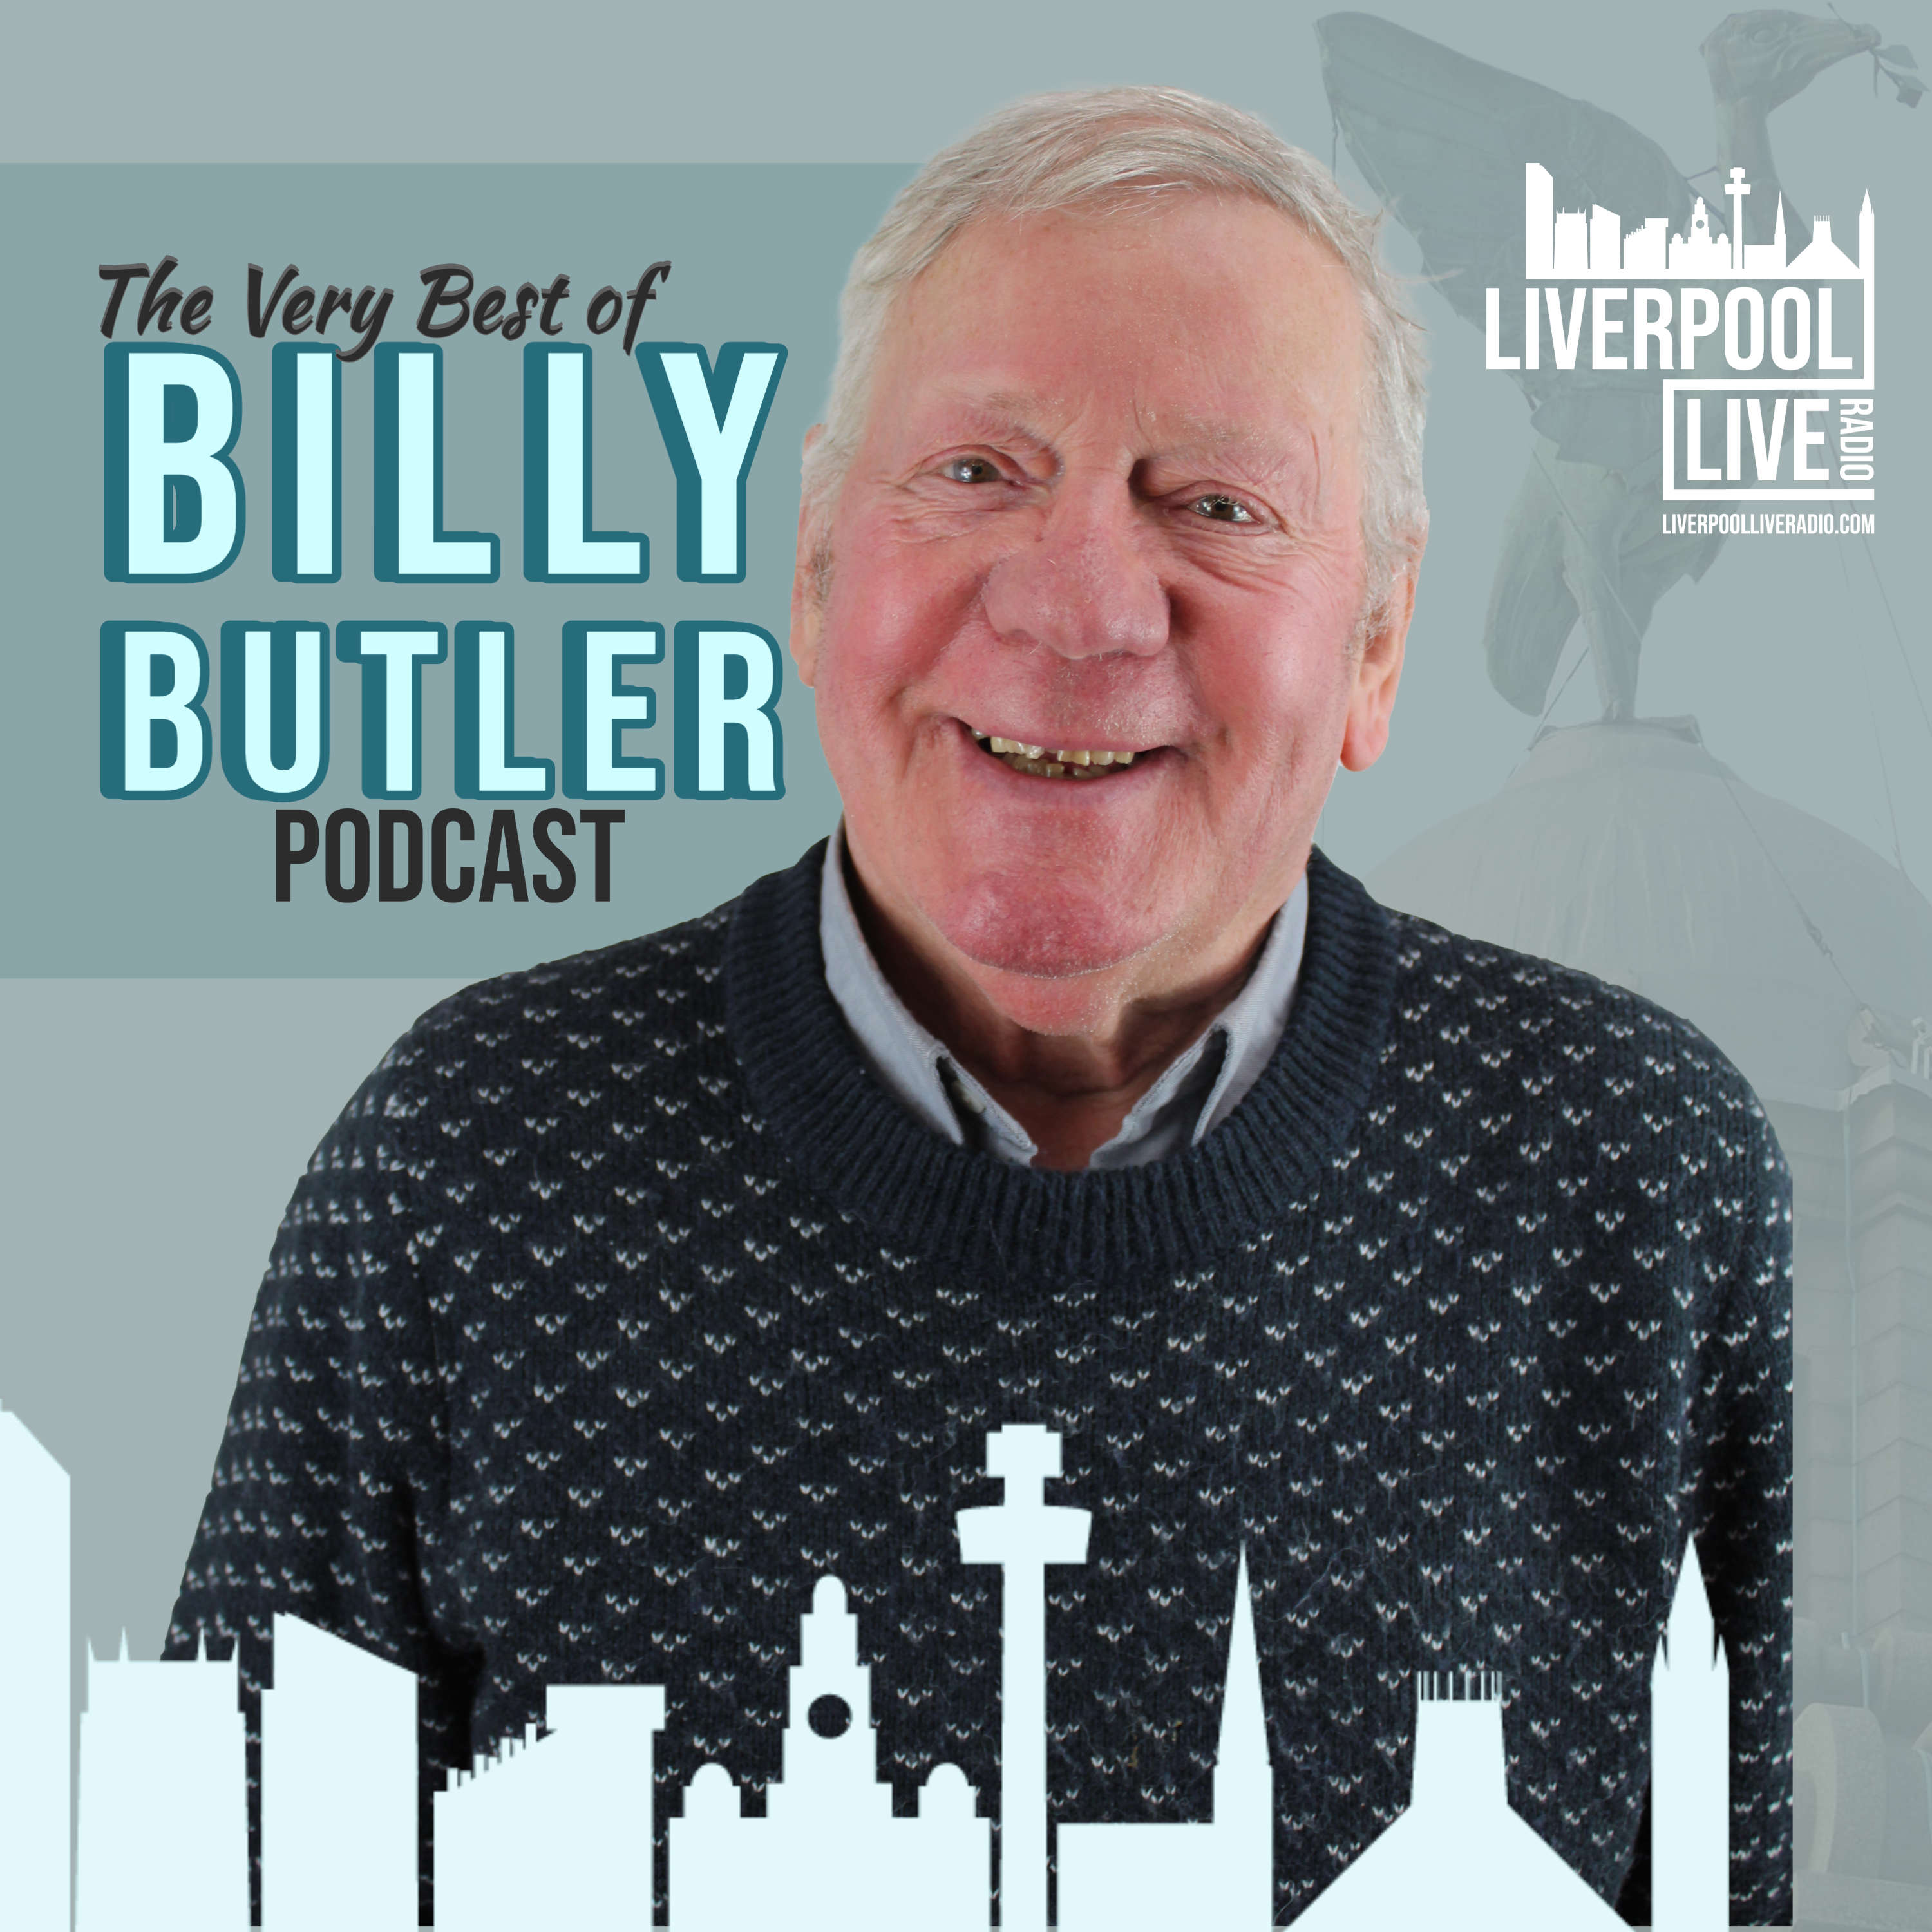 The Very Best of Billy Butler